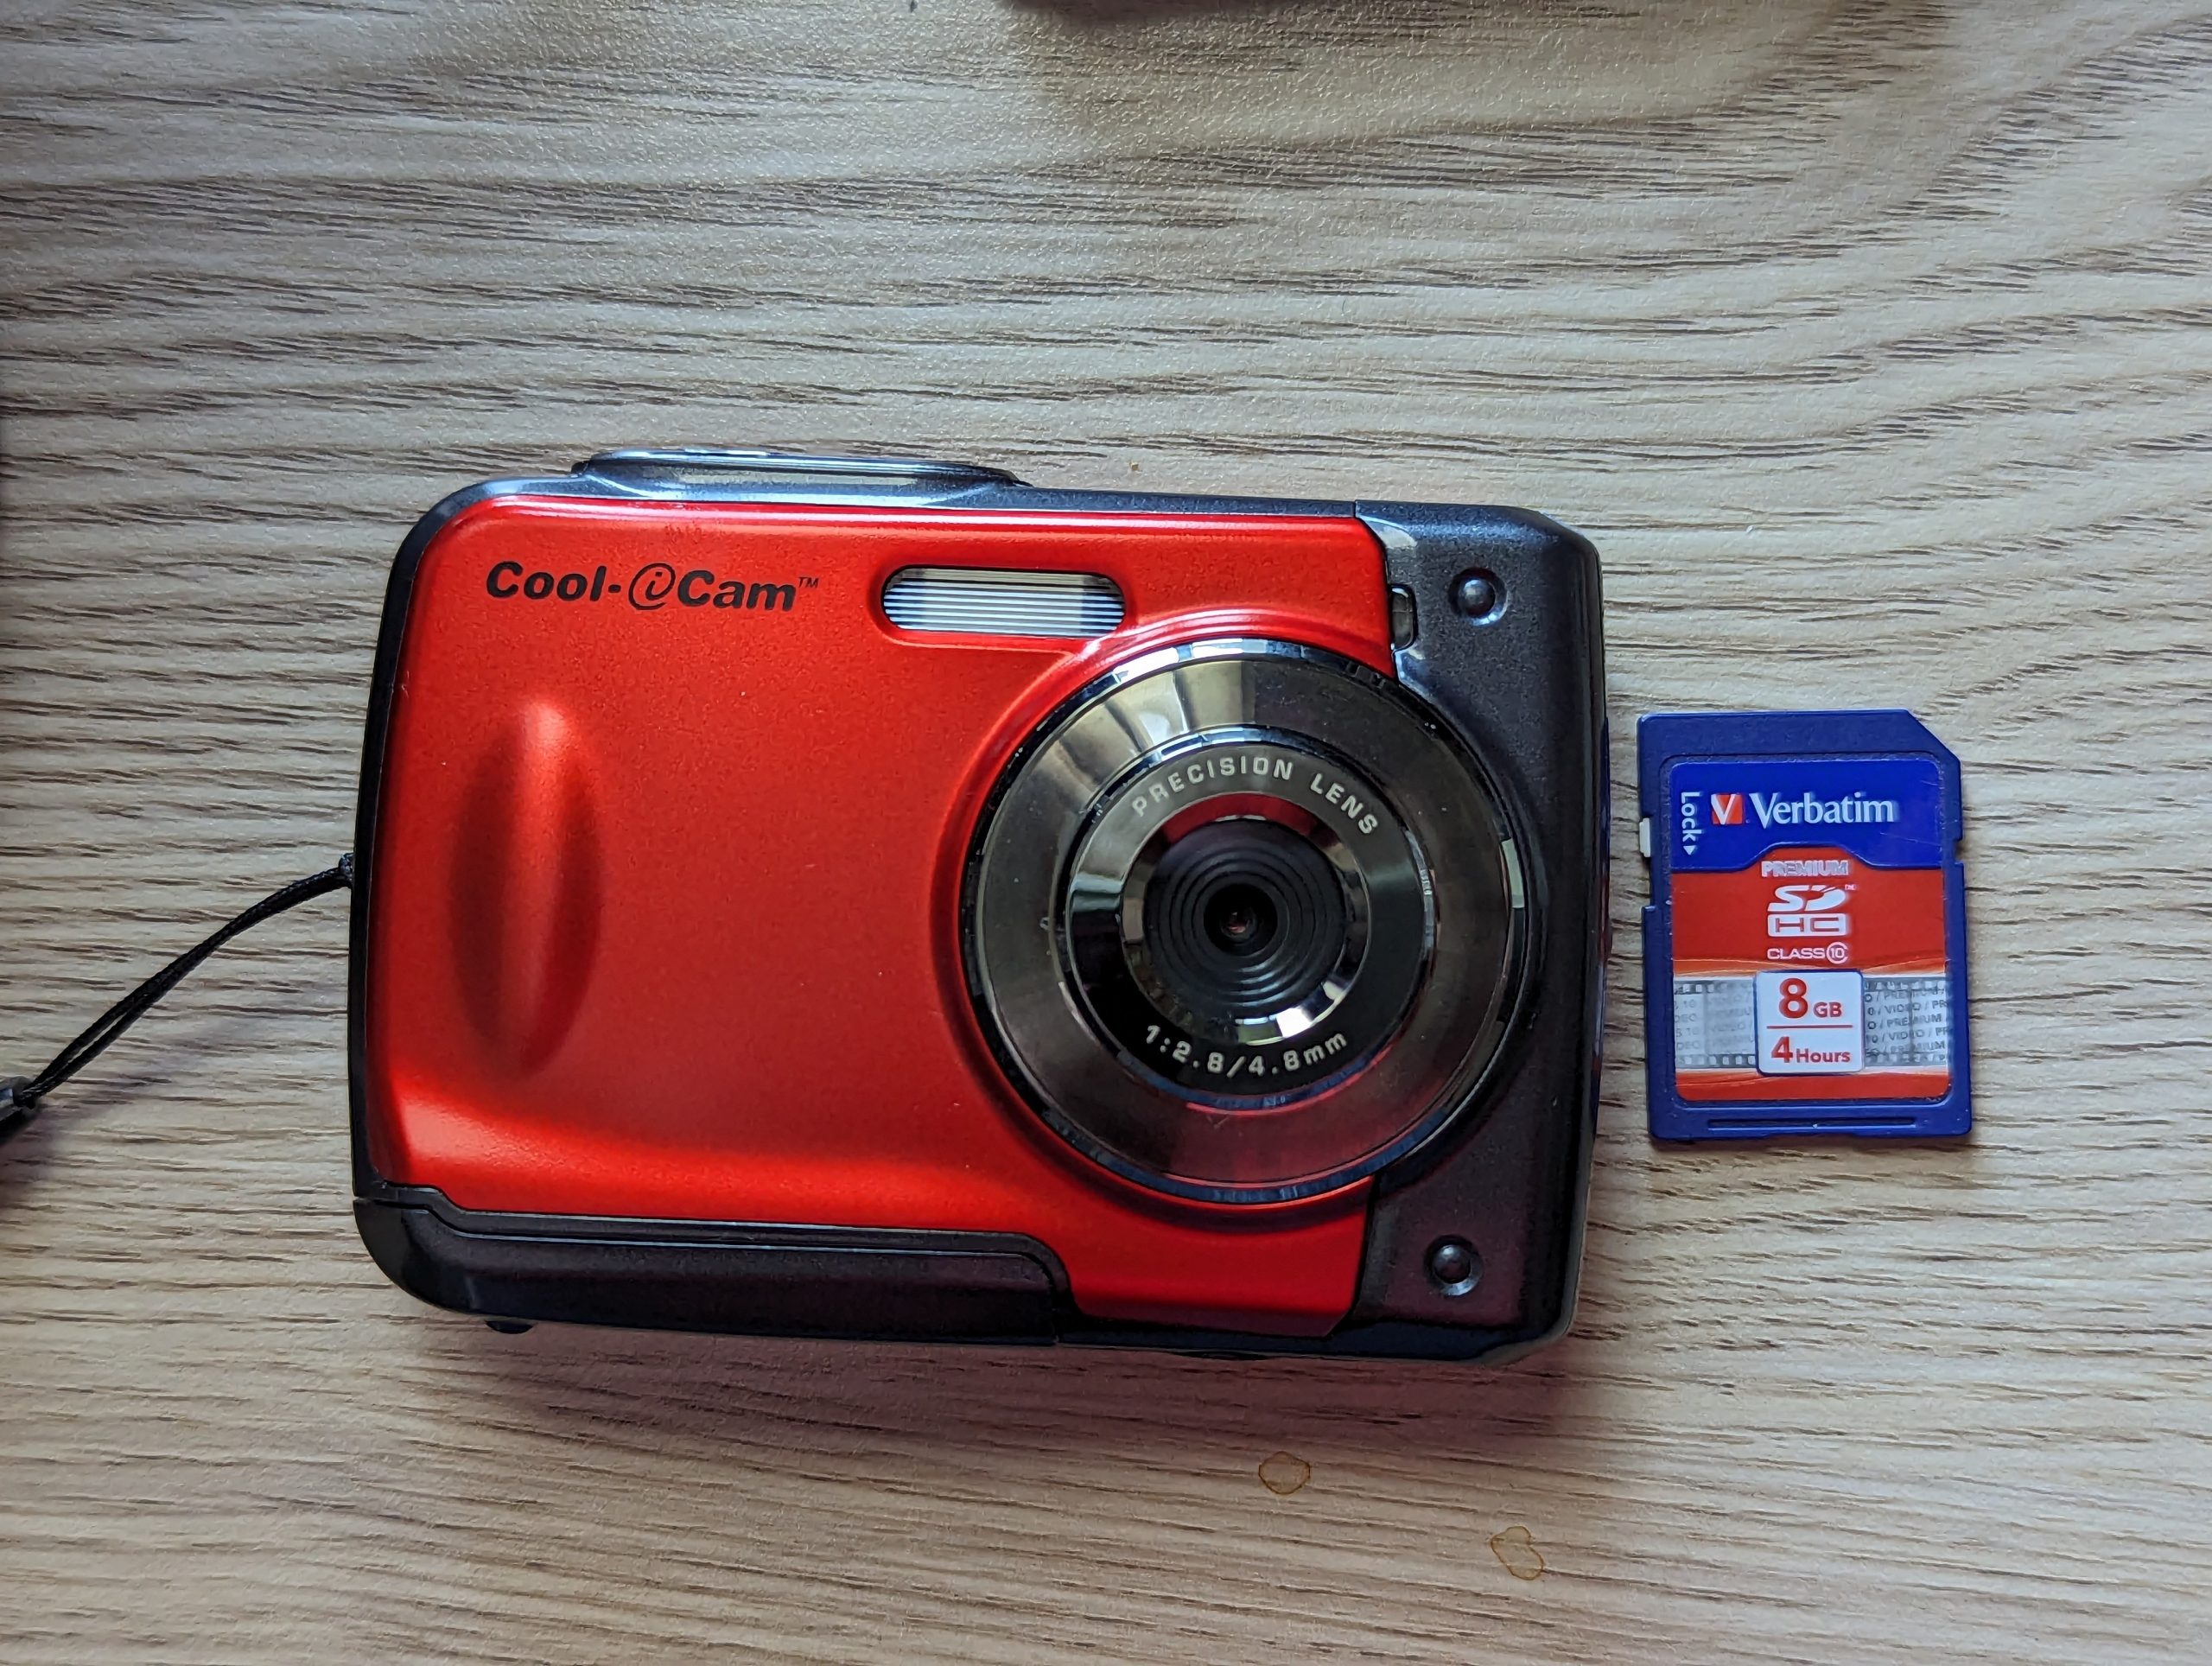 iON Cool-iCam S1000 with a SD card for comparison